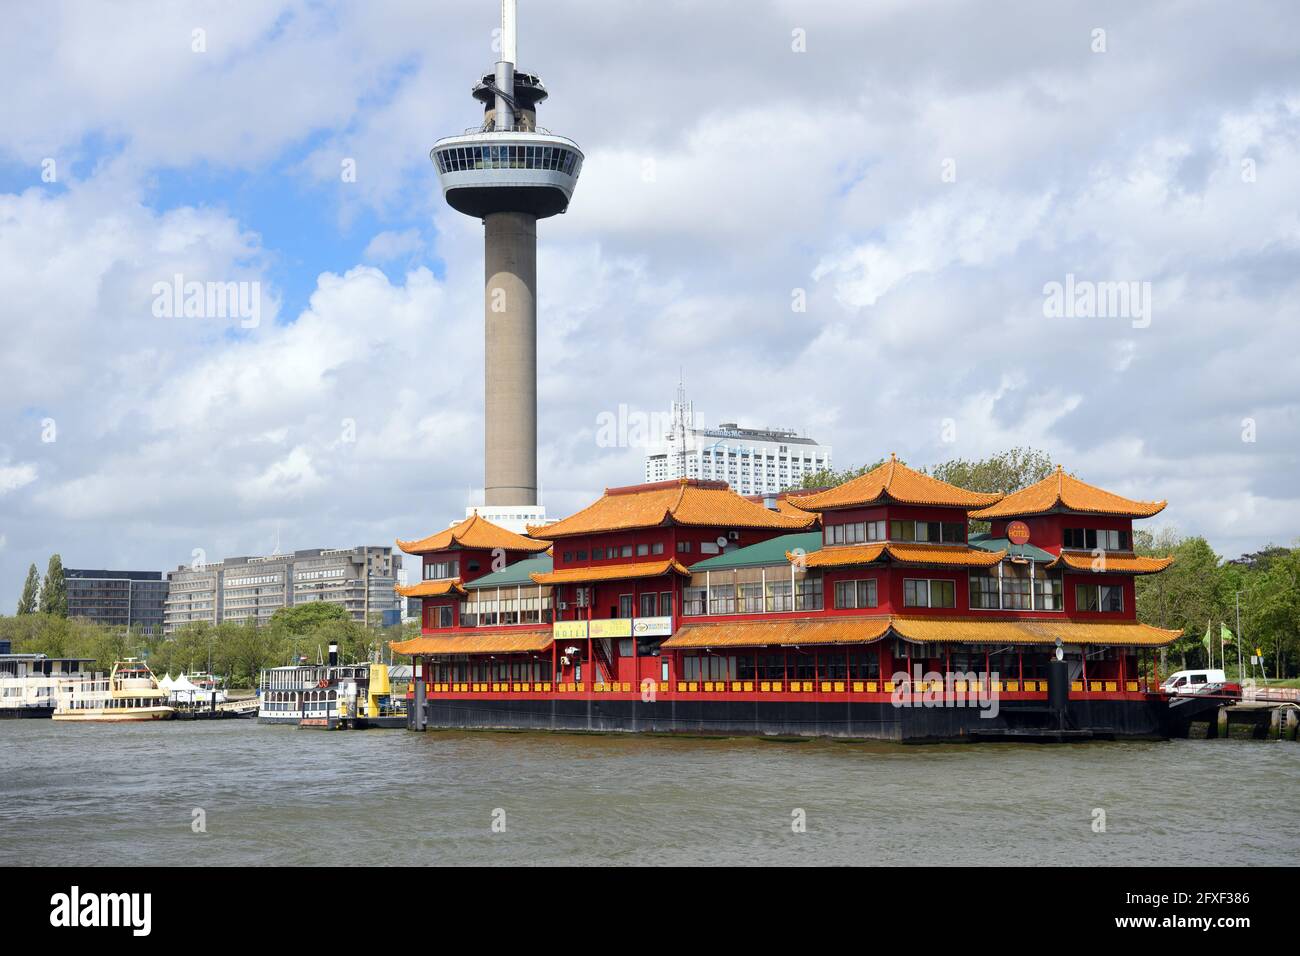 Rotterdam, Netherlands. 21st May, 2021. The Euromast observation tower, designed by architect Huig Maaskant, is located behind the Amazing Oriental Rotterdam Parkhaven. The tower was opened in the 1960s for the garden exhibition Floriade. The Chinese-style building houses restaurants, a hotel and a supermarket. Credit: Soeren Stache/dpa-Zentralbild/dpa/Alamy Live News Stock Photo